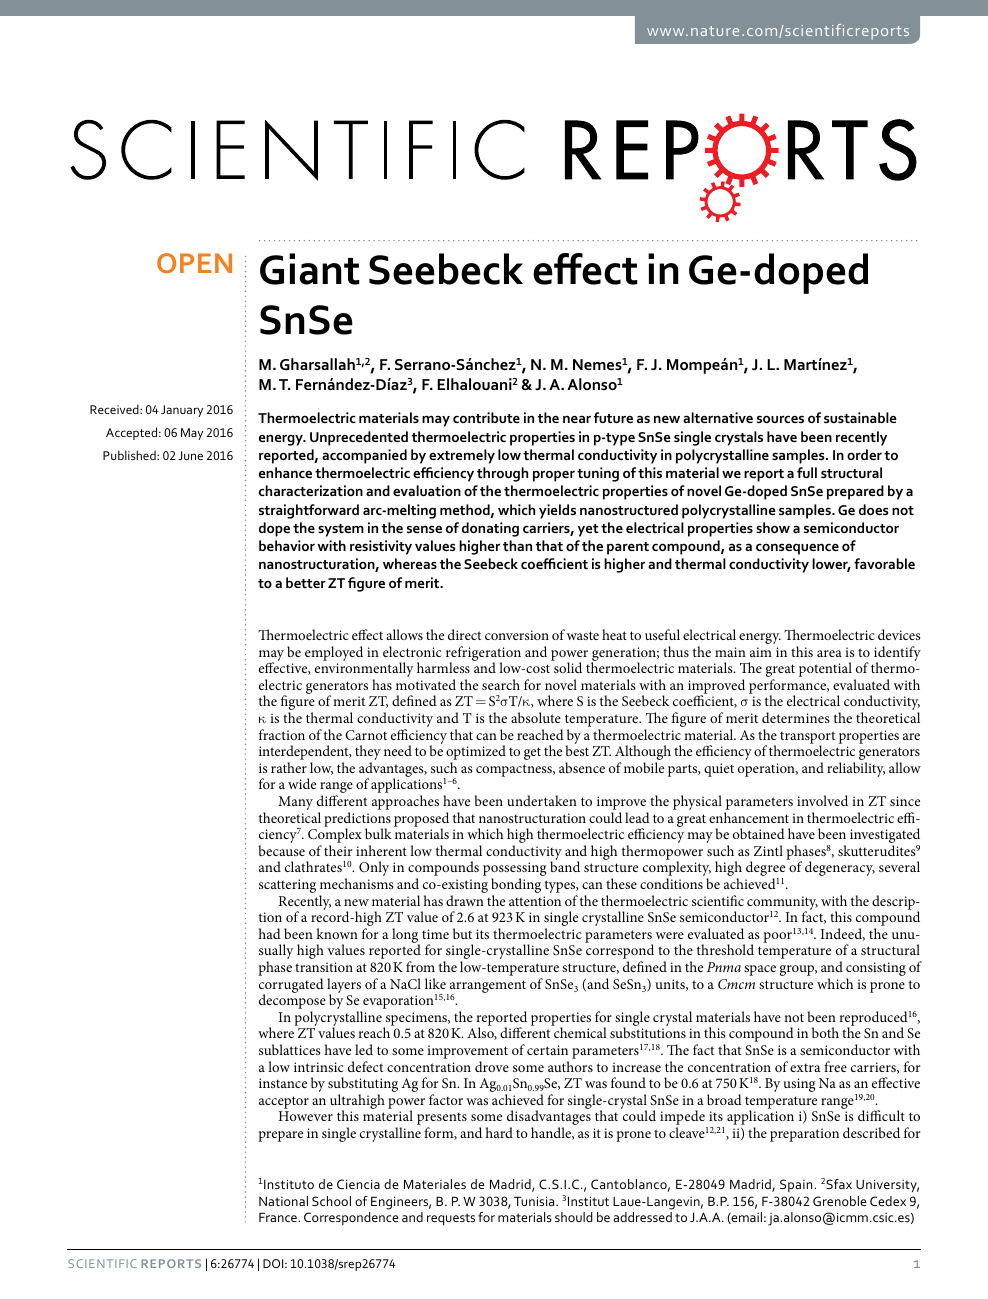 Giant Seebeck Effect In Ge Doped Snse Topic Of Research Paper In Chemical Sciences Download Scholarly Article Pdf And Read For Free On Cyberleninka Open Science Hub